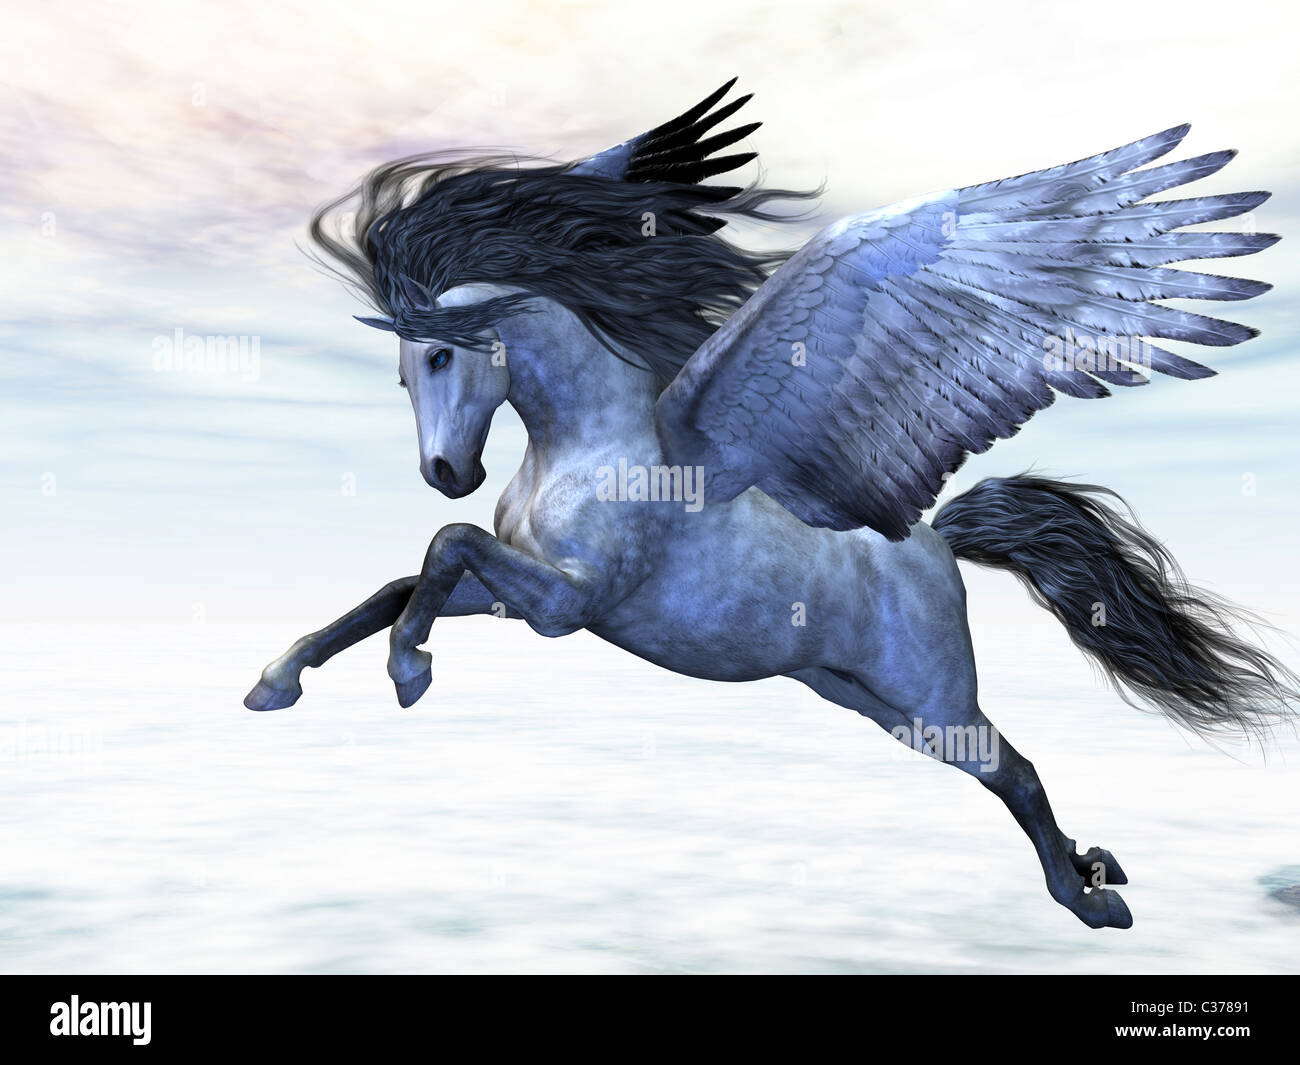 Pegasus flies high in the air over the clouds. Stock Photo